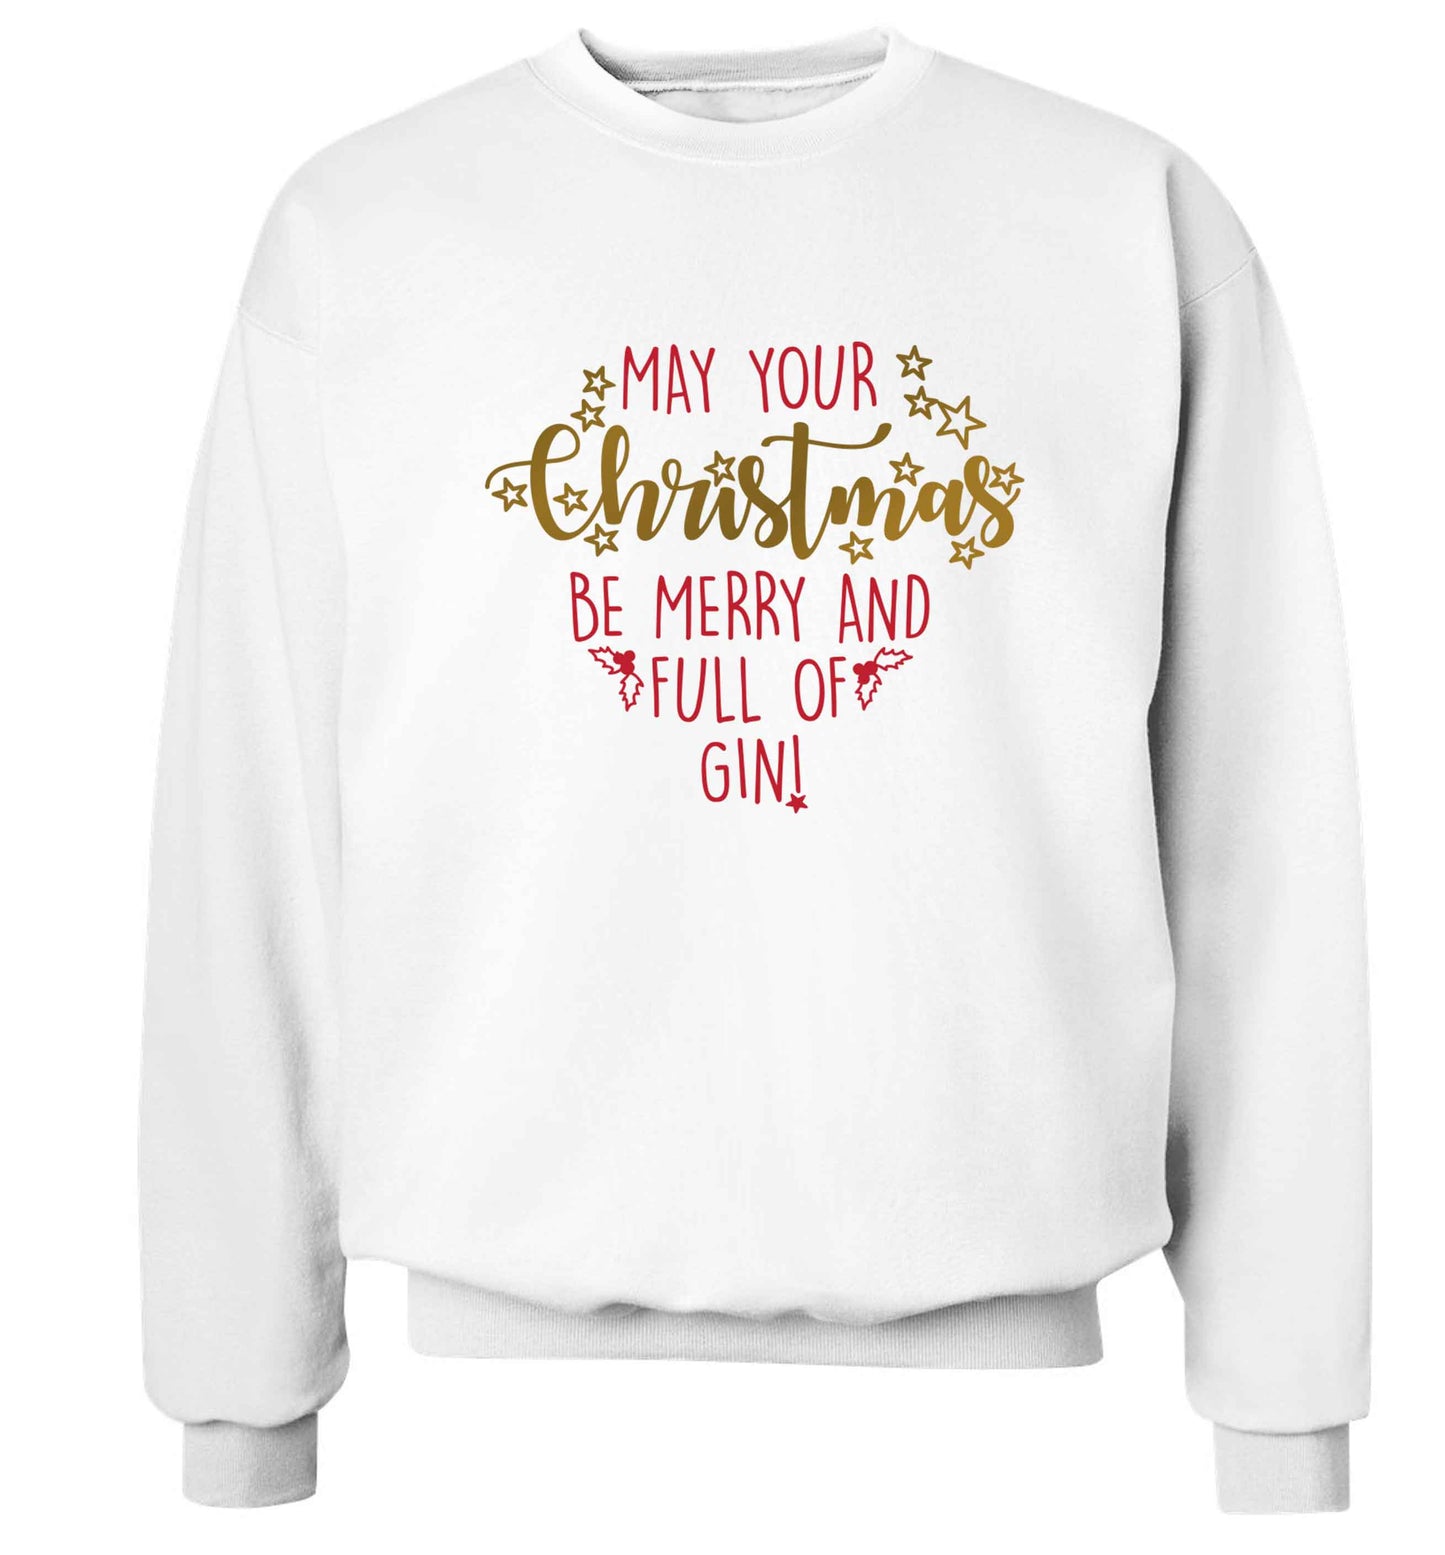 May your Christmas be merry and full of gin Adult's unisex white Sweater 2XL